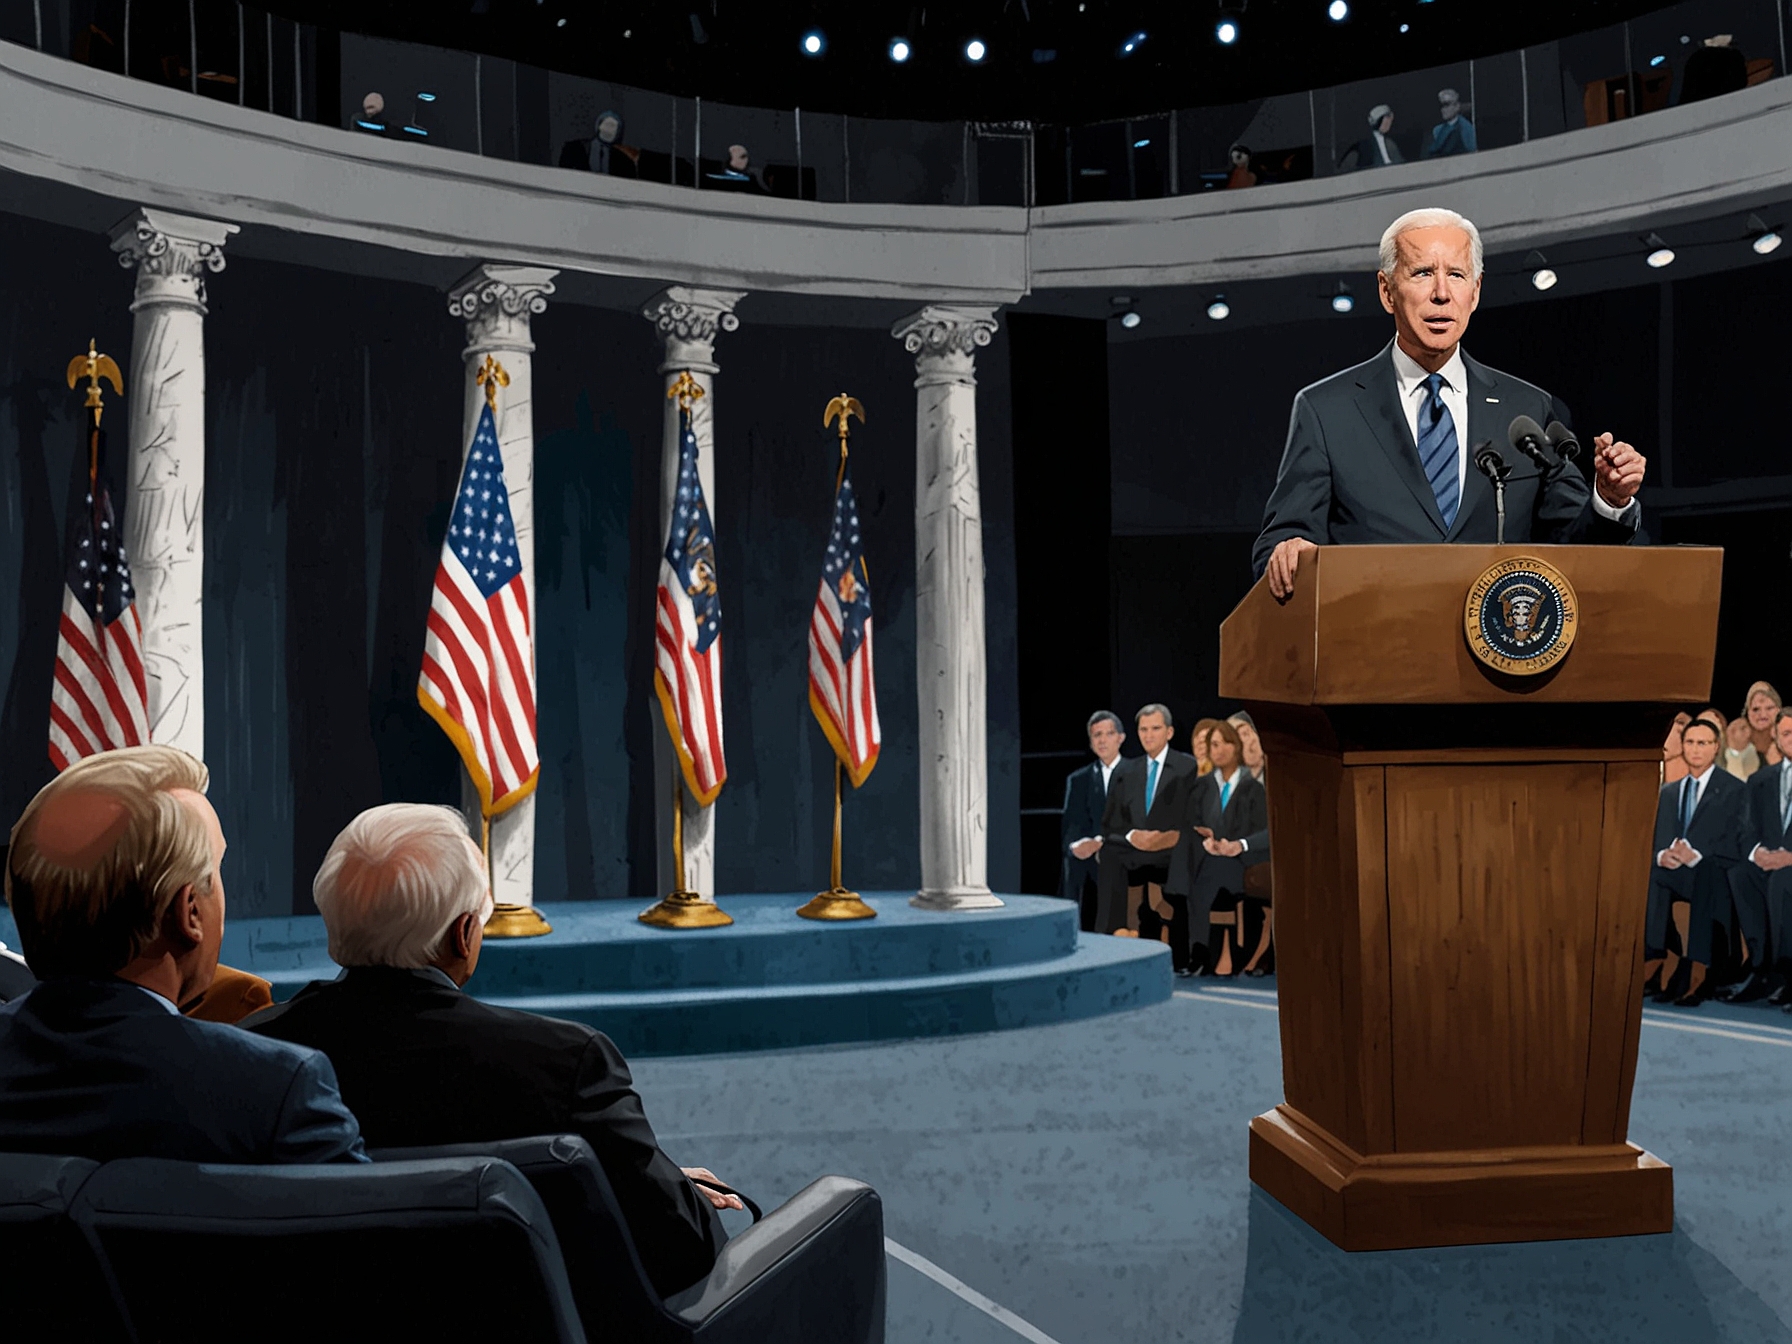 Illustration of the debate stage with Biden standing confidently, addressing the audience and Trump's empty podium symbolizing RFK Jr.'s absence, highlighting a focused confrontation.